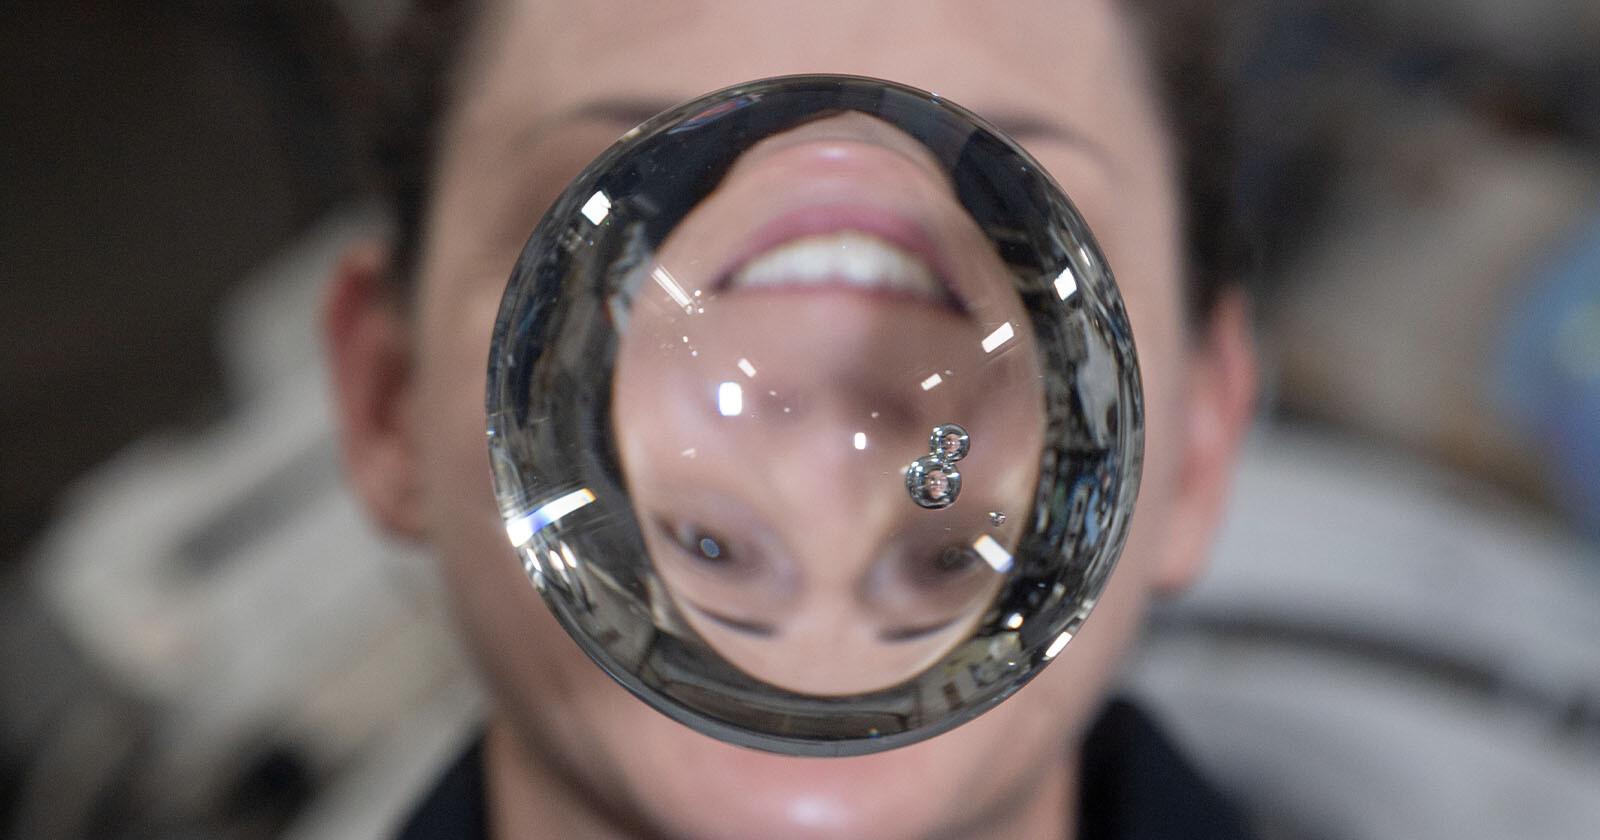 Astronauts Image Refracted Through a Weightless Water Bubble in Space